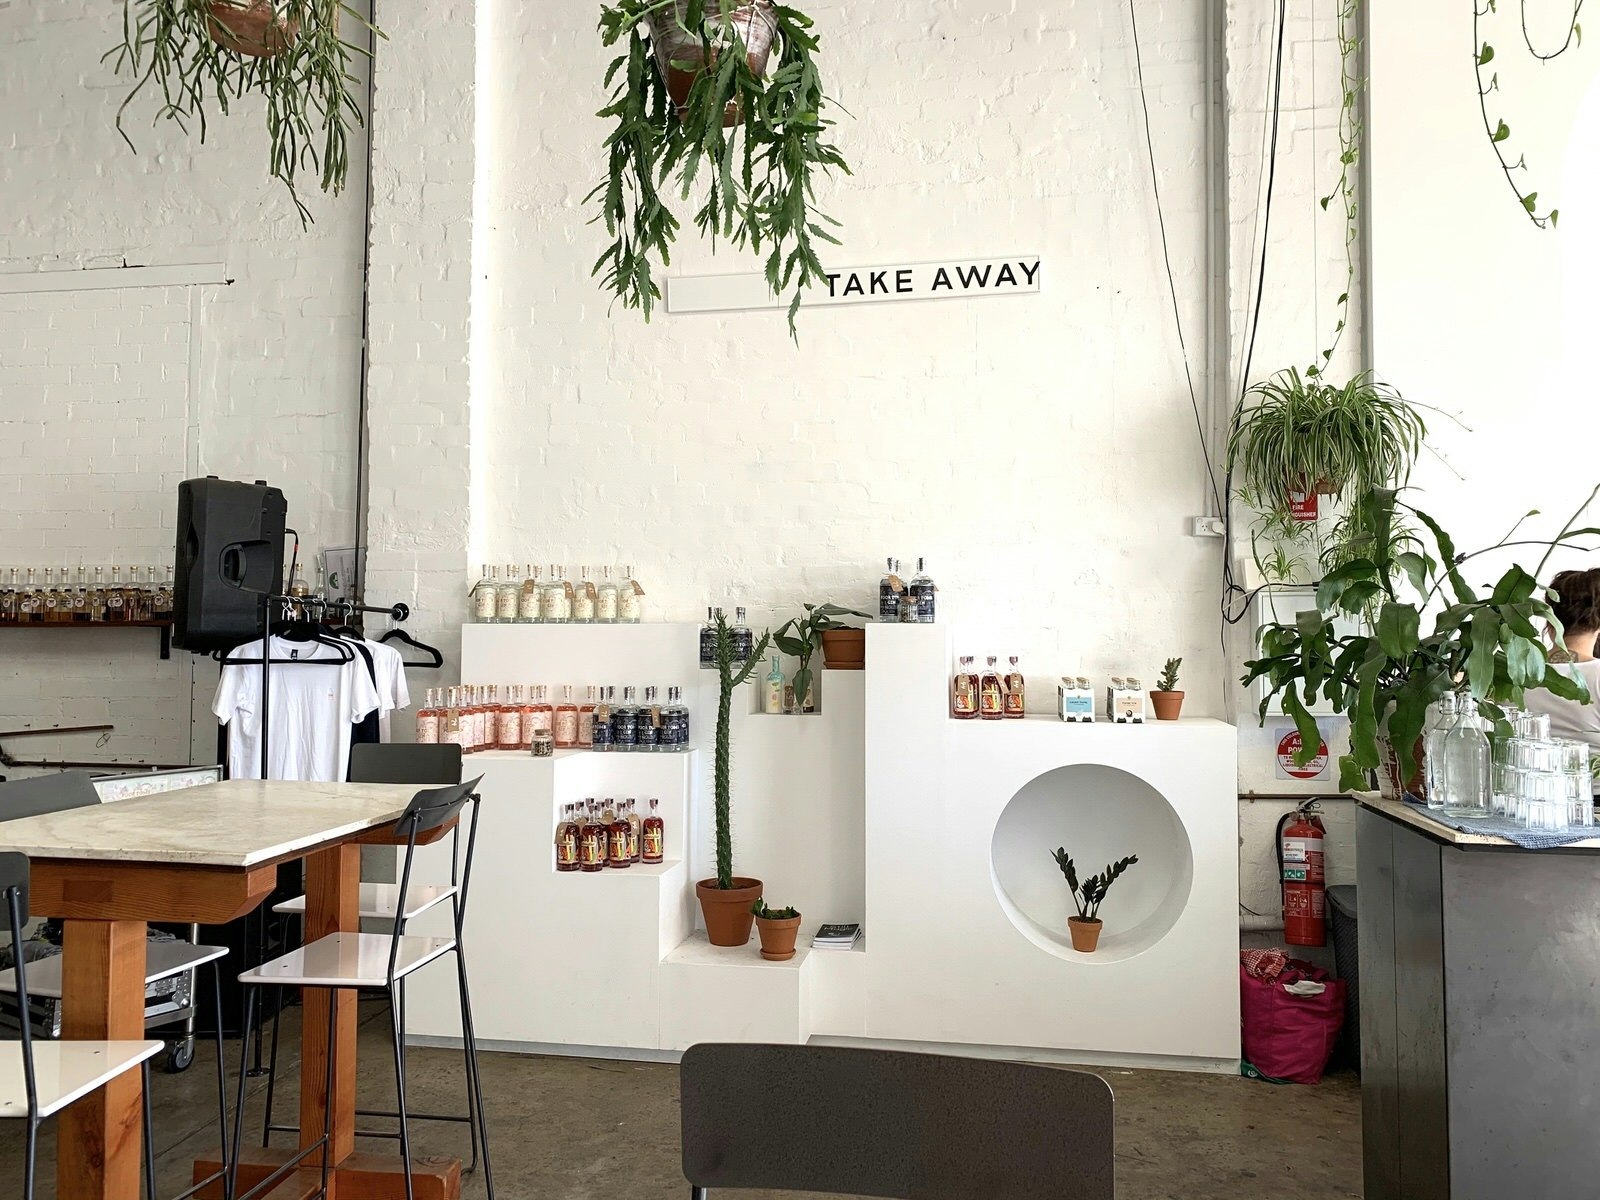 A brick wall painted white with a sign reading 'TAKE AWAY'. Underneath the sign different colour bottles of gin are arranged on an angular white built-in shelving unit along with potted plants.